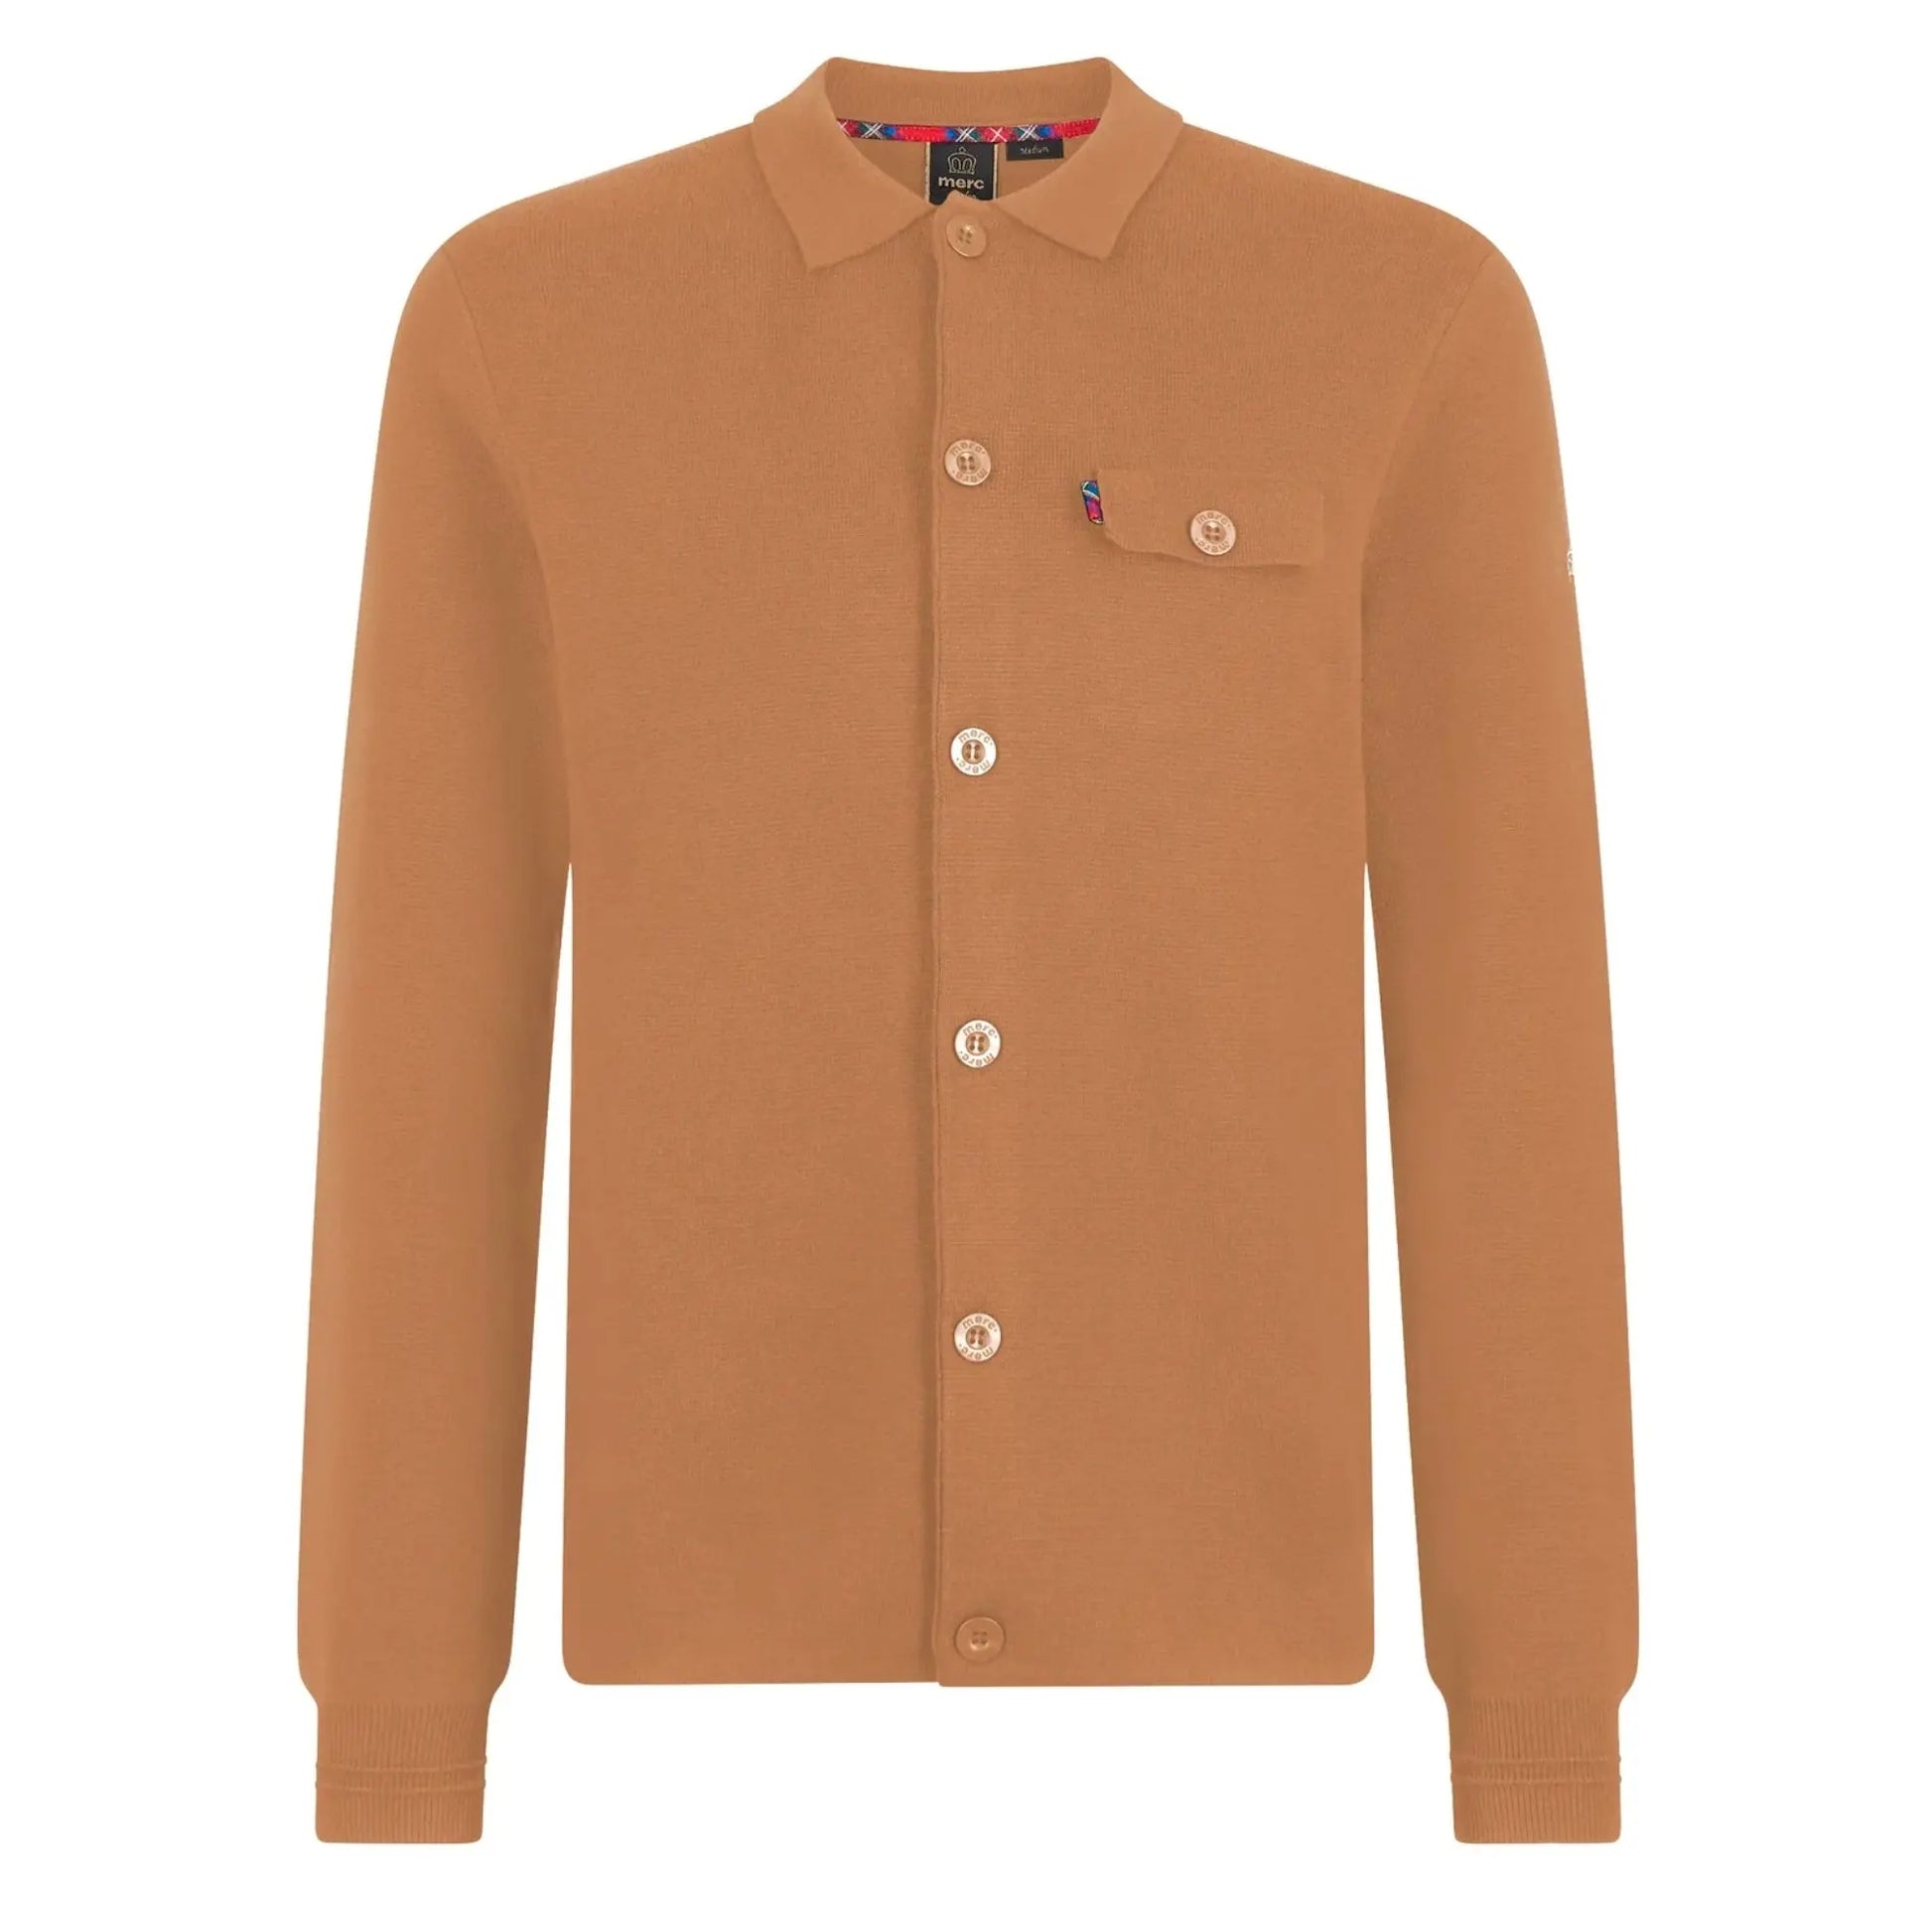 Buy Merc London Rathbone Knitted Cardigan - Biscuit | Cardiganss at Woven Durham